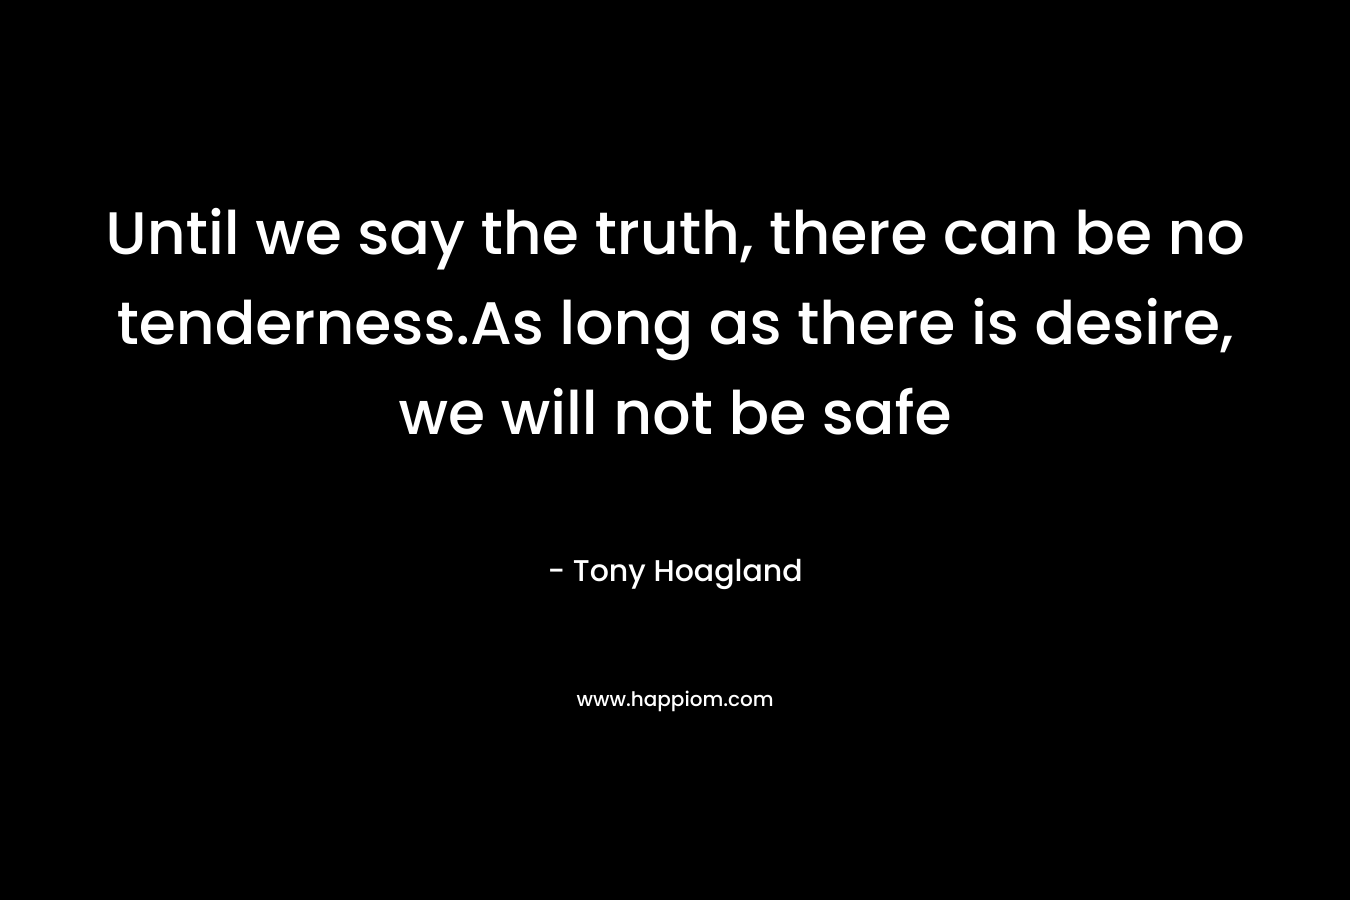 Until we say the truth, there can be no tenderness.As long as there is desire, we will not be safe